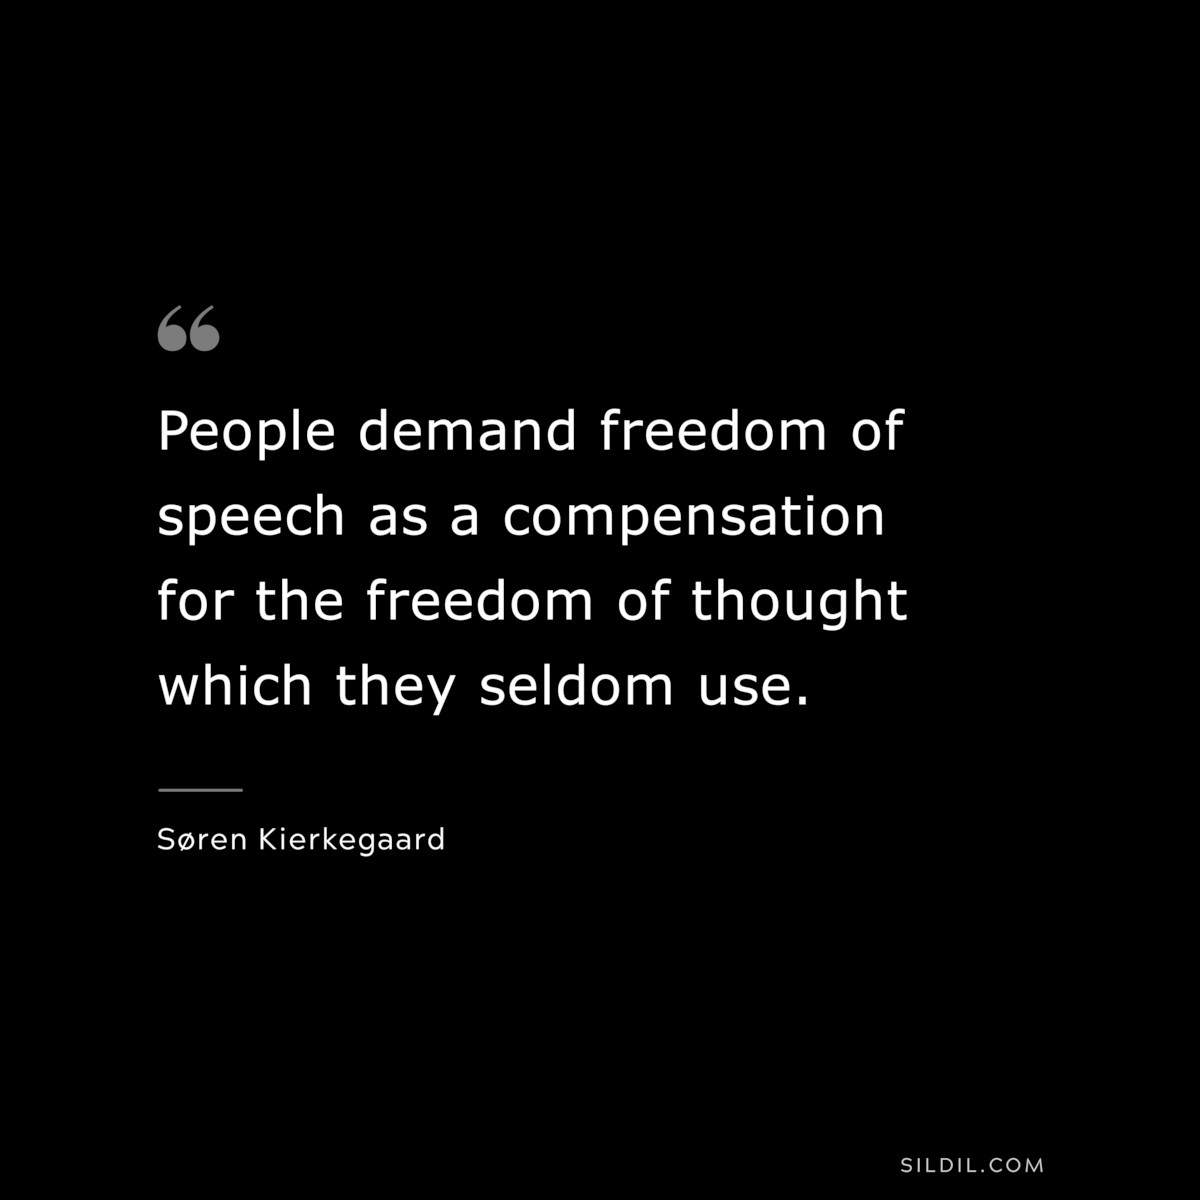 People demand freedom of speech as a compensation for the freedom of thought which they seldom use. ― Søren Kierkegaard